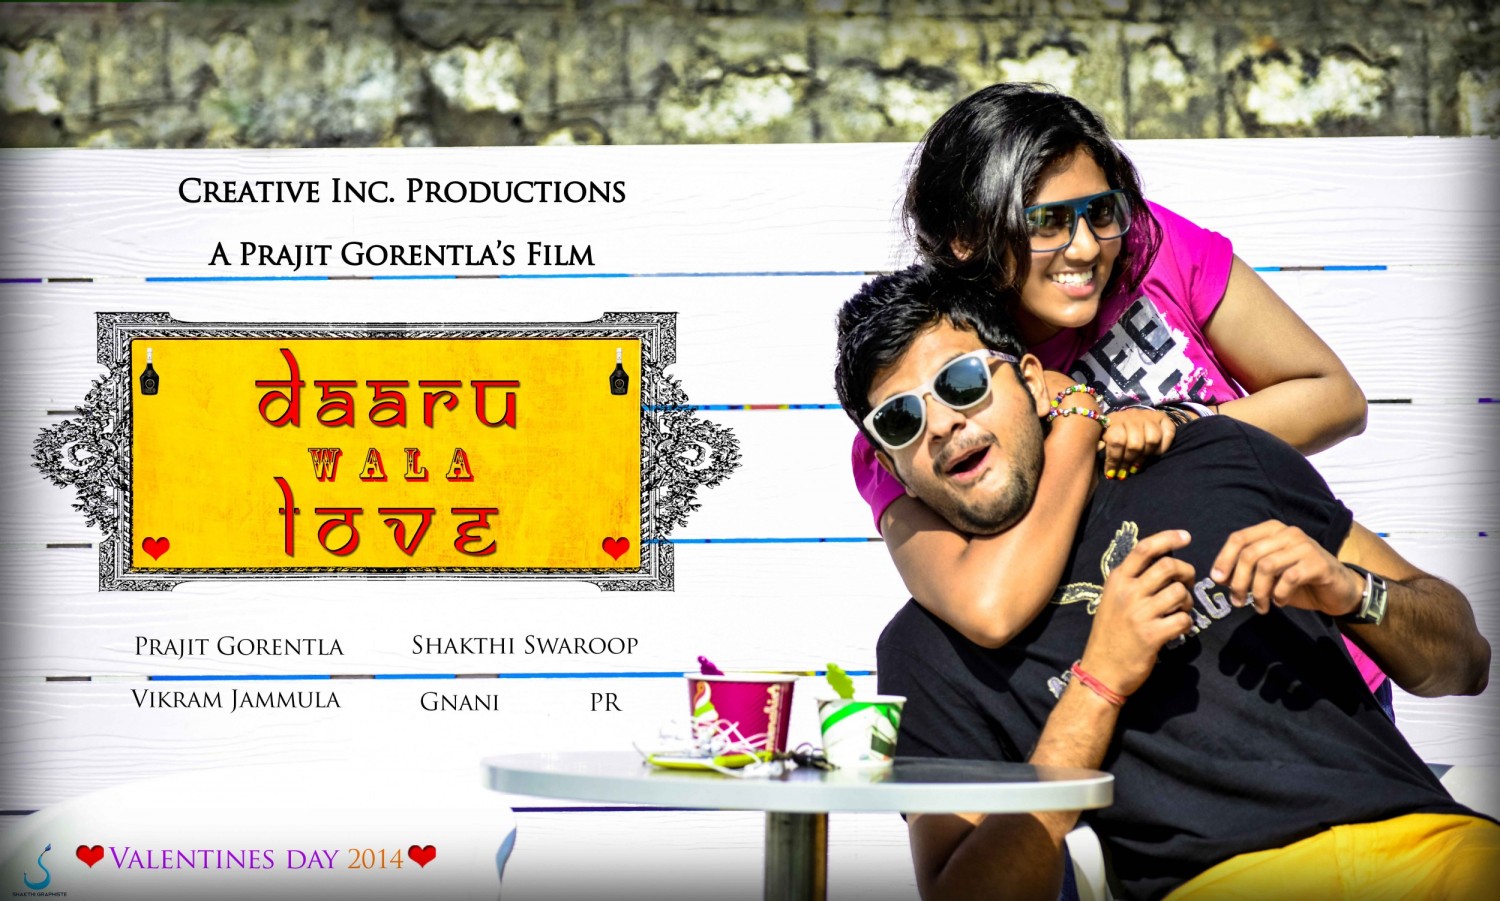 Extra Large Movie Poster Image for Daaru Wala Love